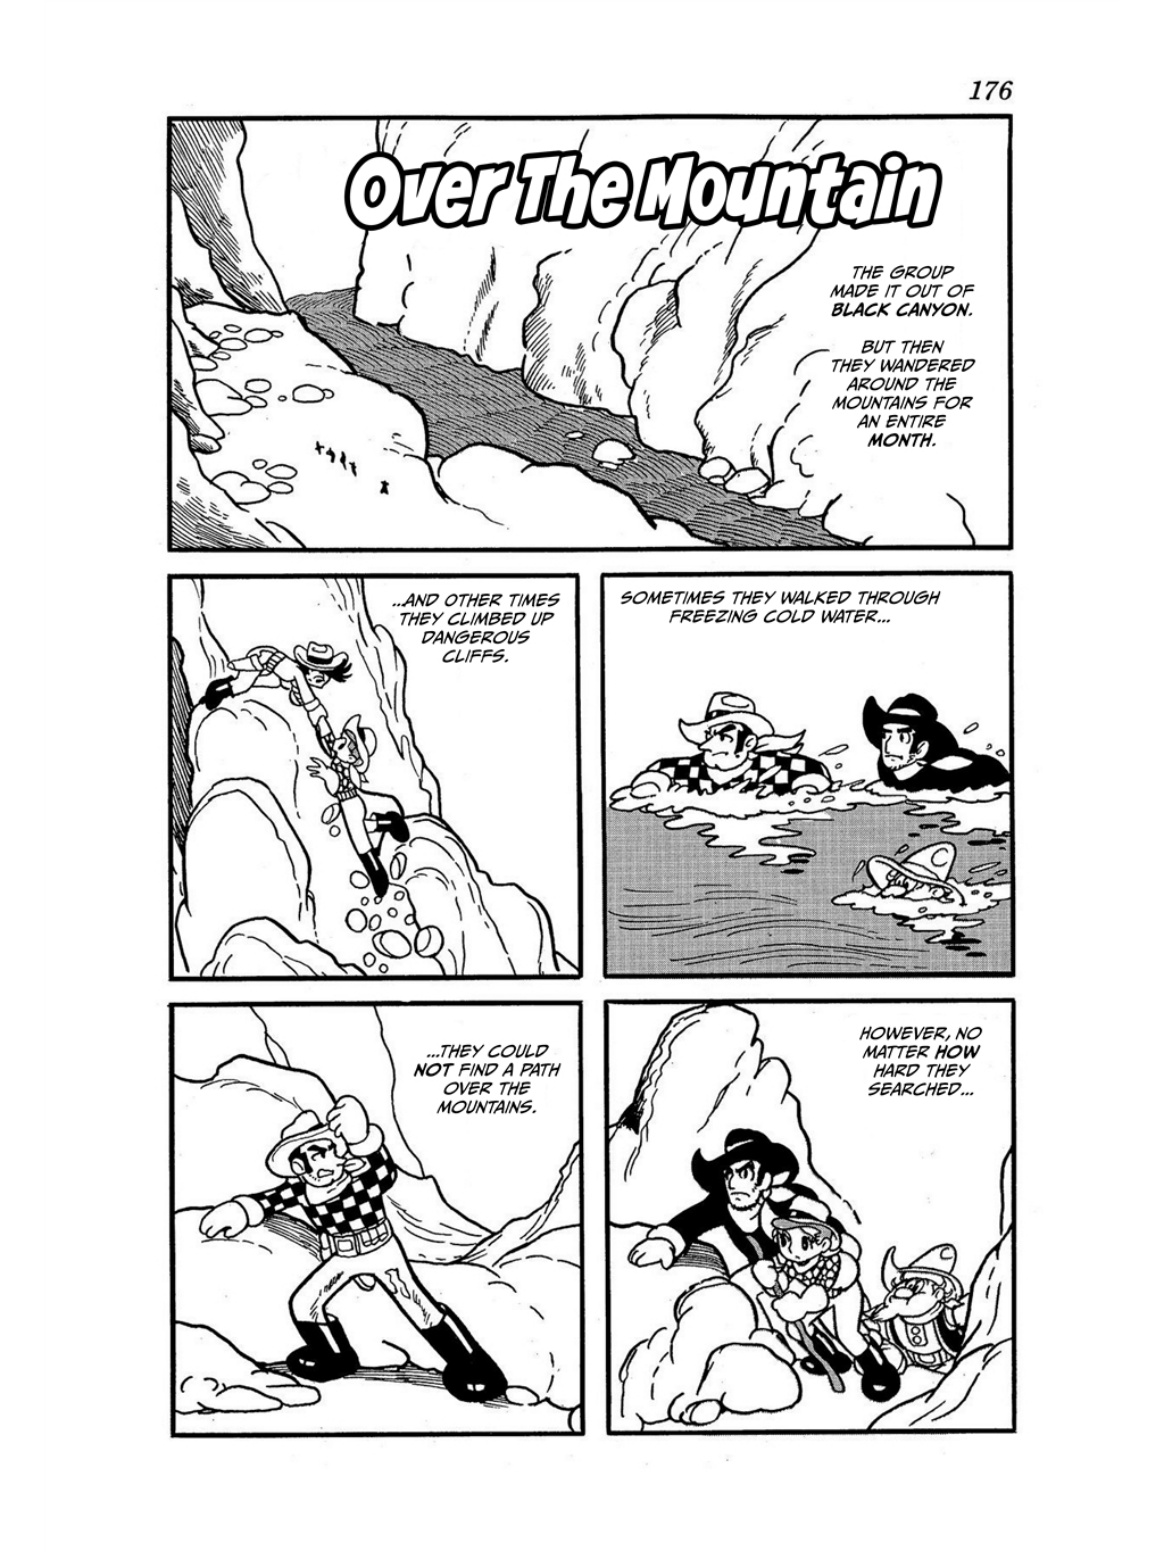 Lemon Kid Vol.1 Chapter 11: Black Canyon - Over The Mountain - Picture 1